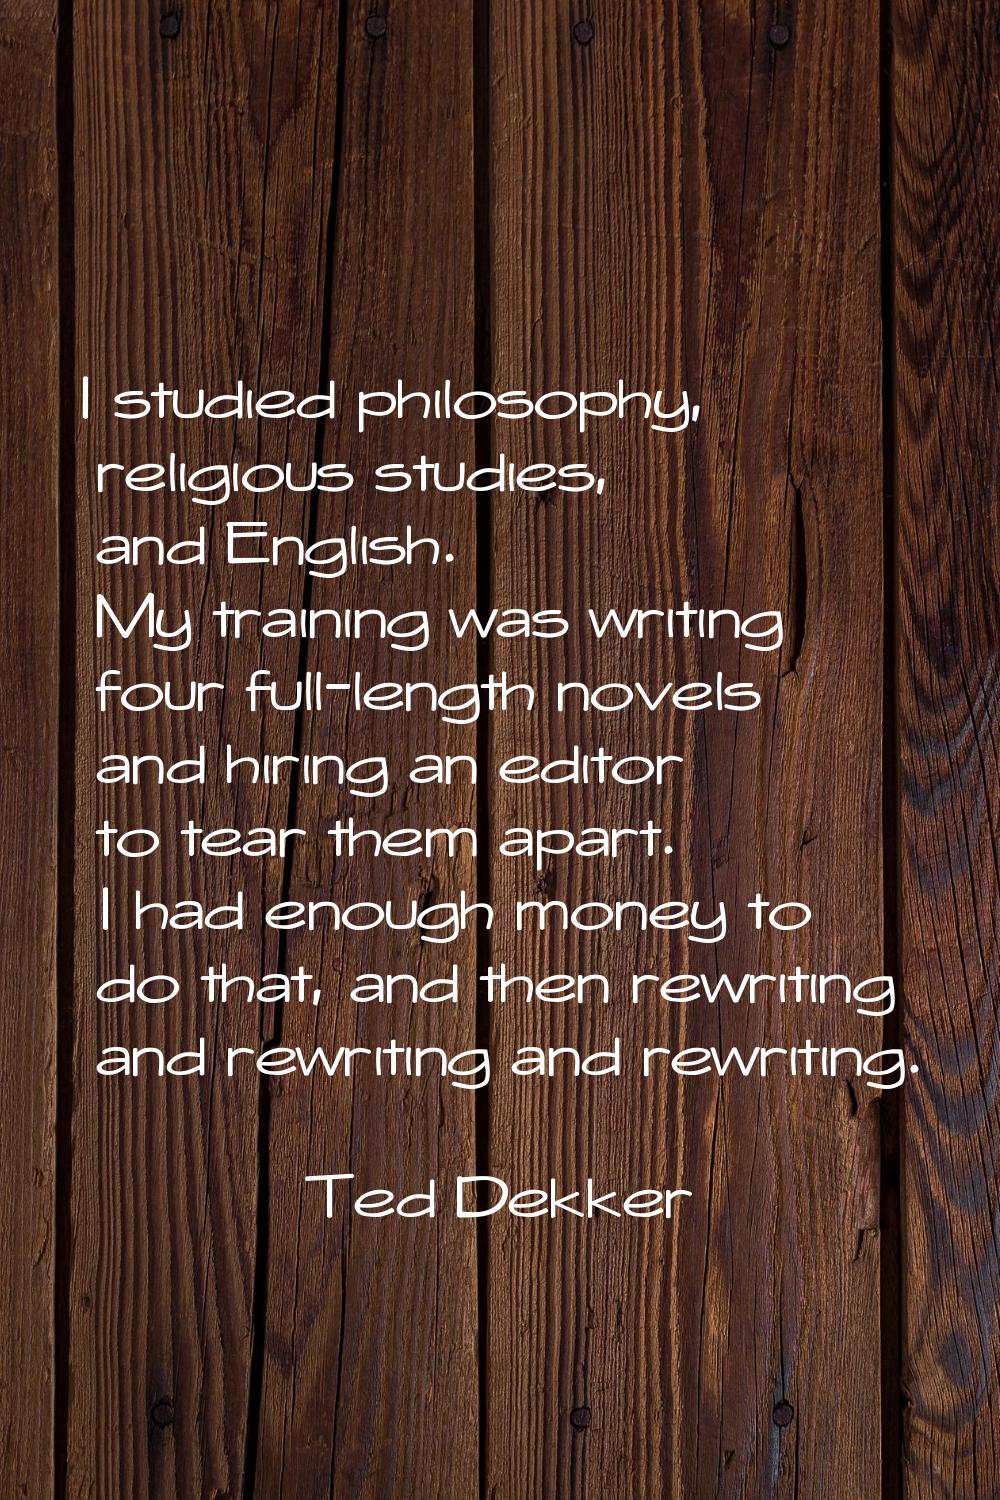 I studied philosophy, religious studies, and English. My training was writing four full-length nove